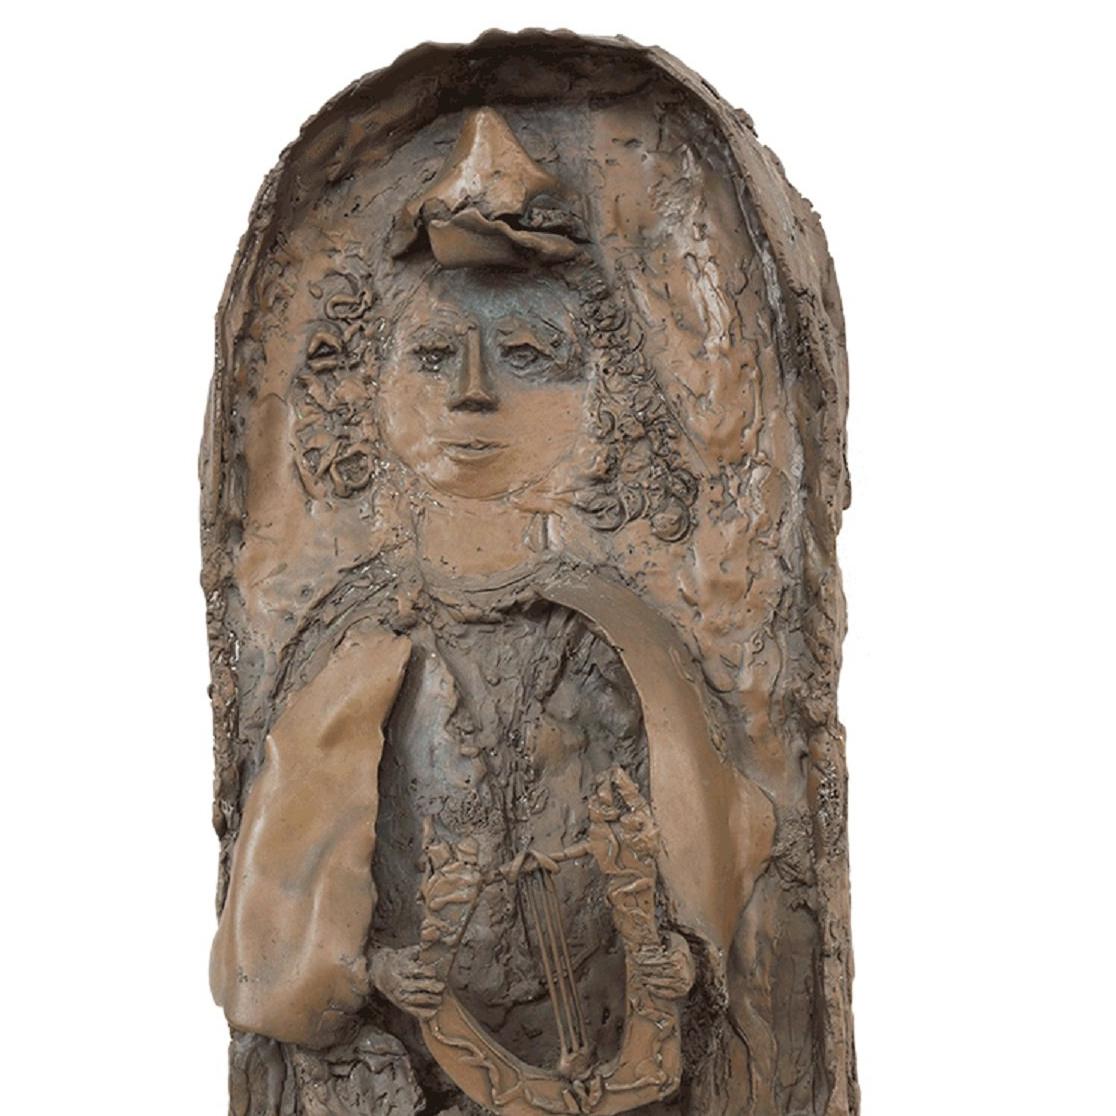 Heavy Bronze Relief Plaque, Young King David with Harp - Gold Figurative Sculpture by Hana Geber